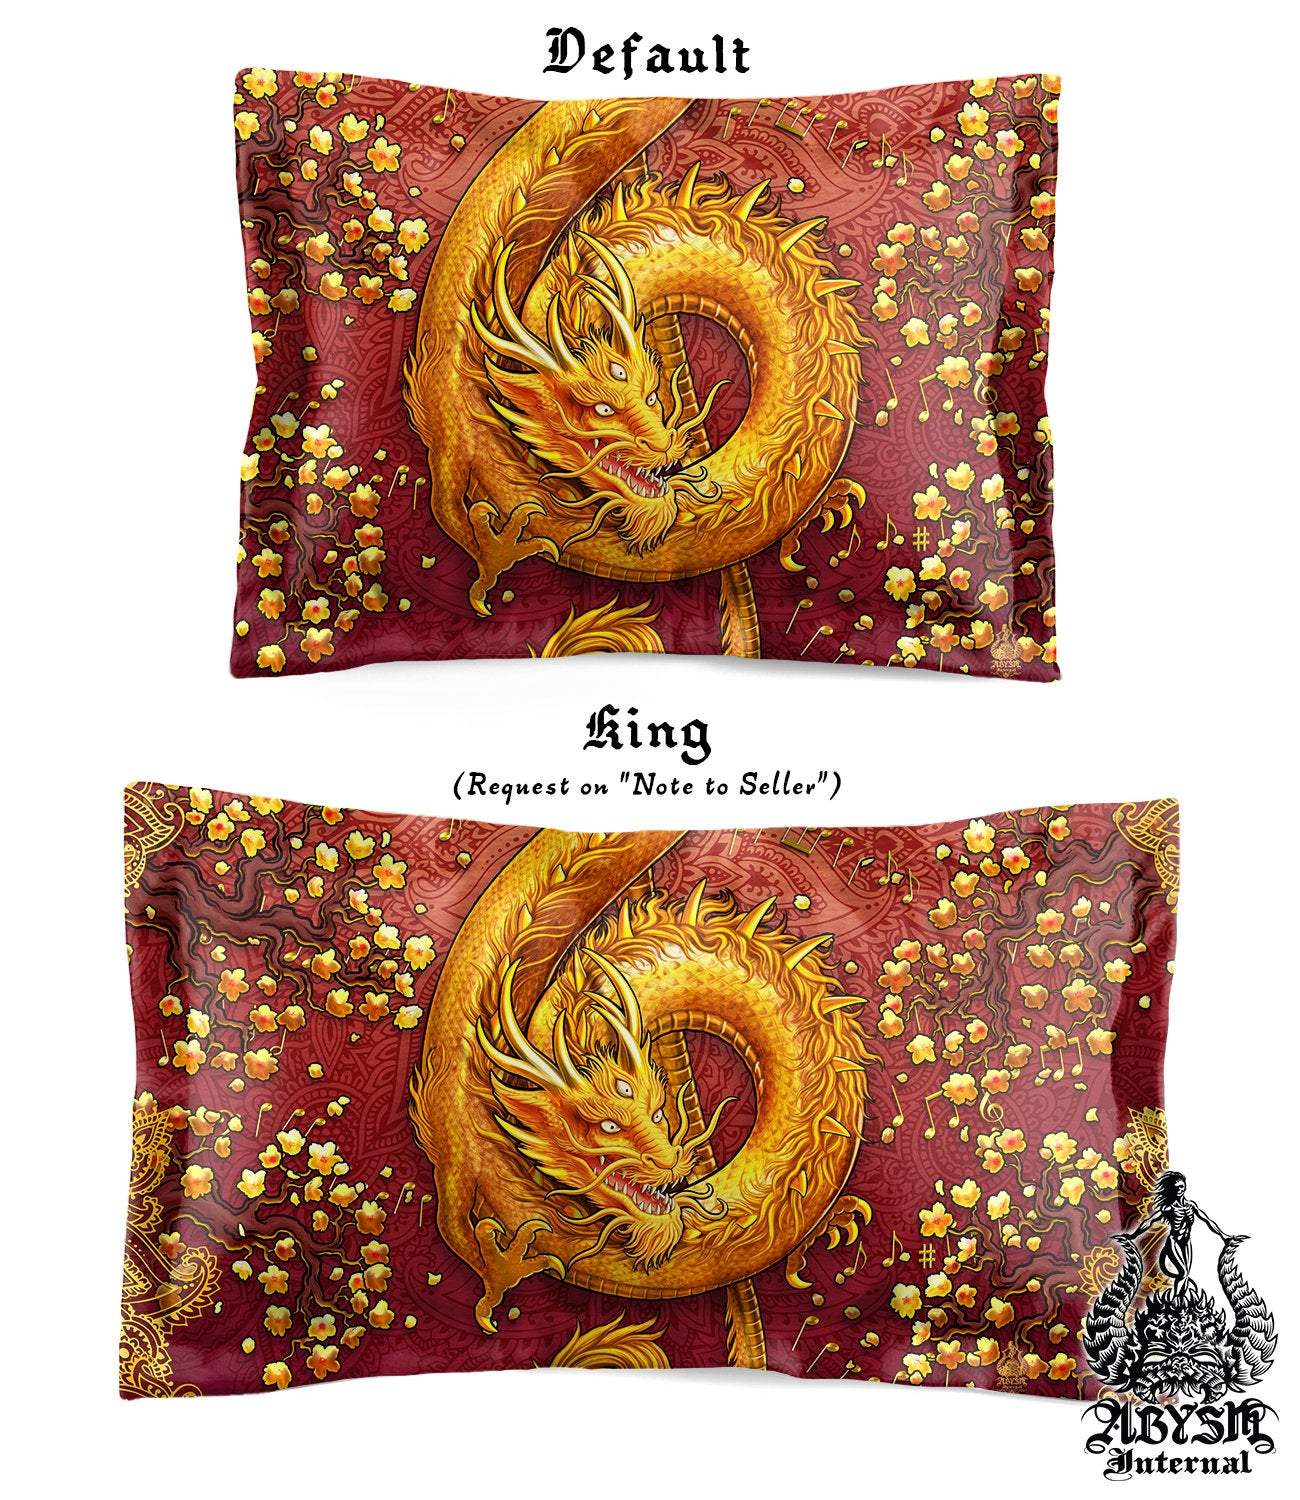 Boho Bedding Set, Comforter and Duvet, Music Art, Hippie Bed Cover and Bedroom Decor, King, Queen and Twin Size - Gold Dragon, Mandalas - Abysm Internal